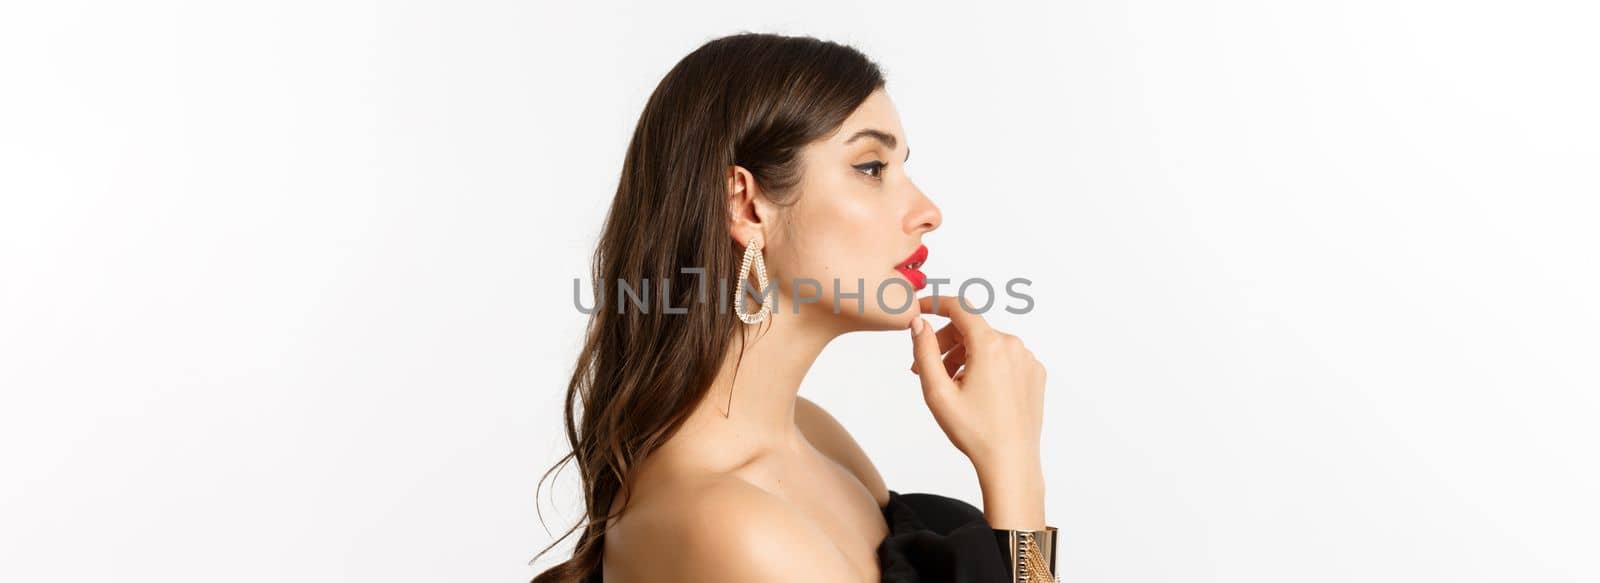 Fashion and beauty concept. Profile view of attractive and stylish woman in black evening dress, makeup and earrings, looking left sensual, standing over white background.